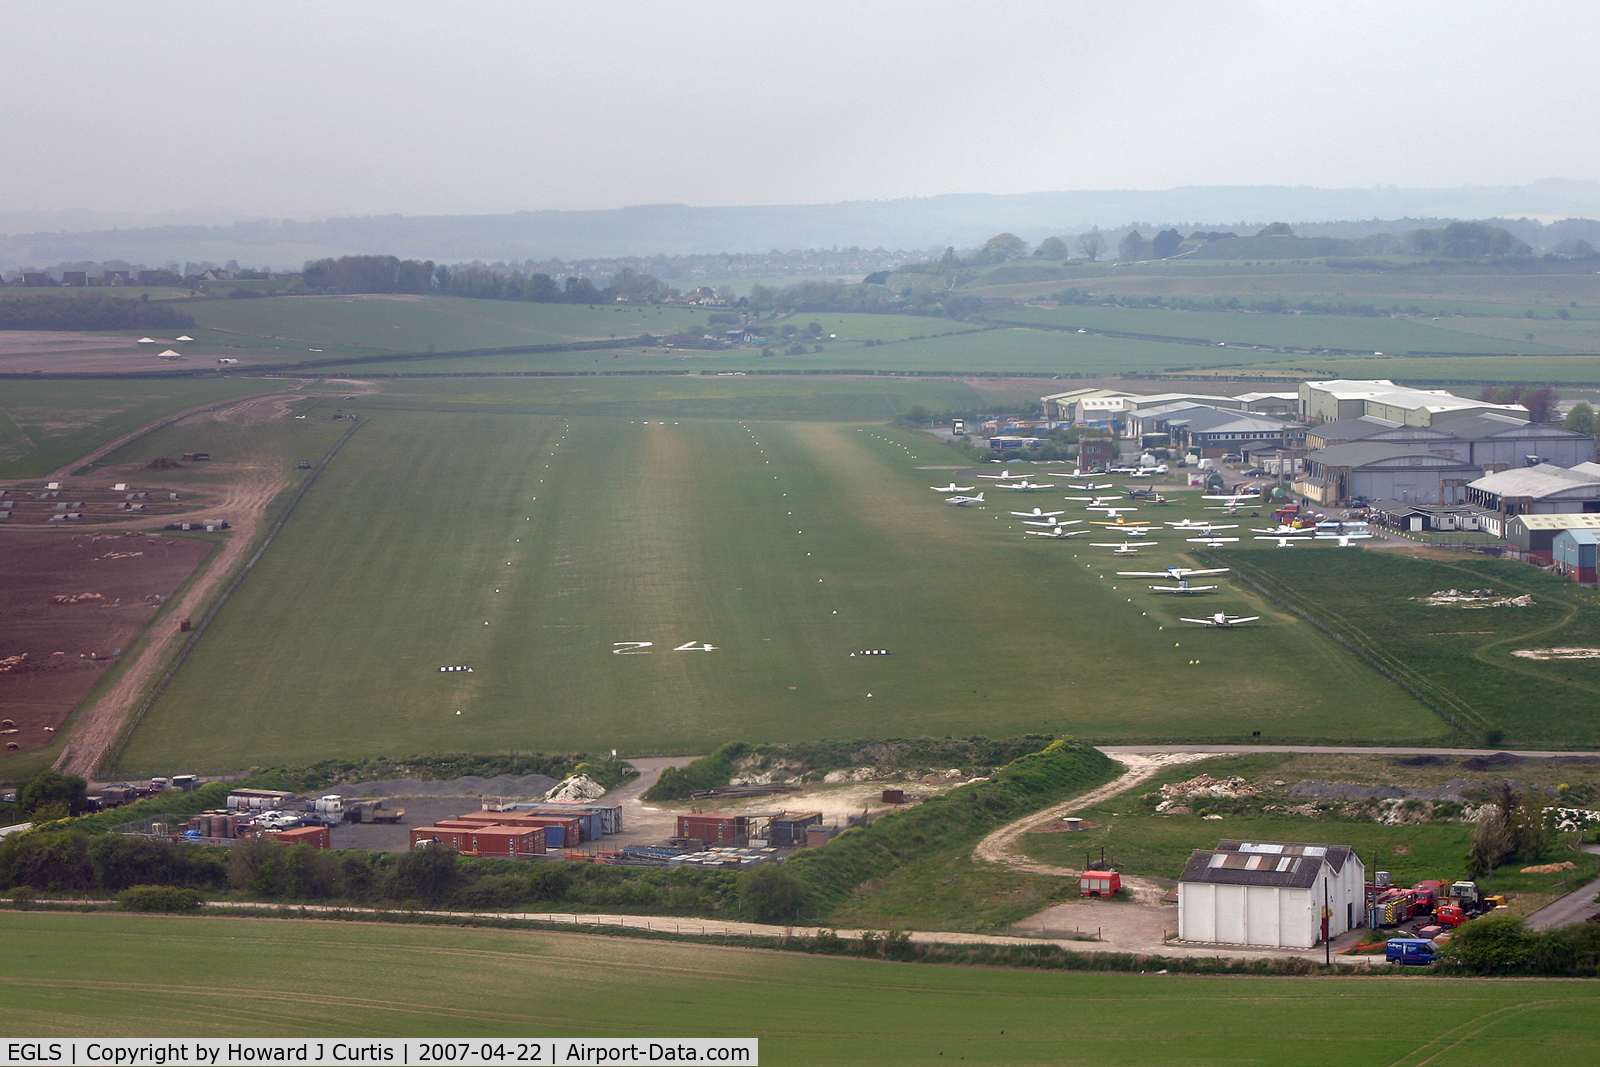 Old Sarum Airfield Airport, Salisbury, England United Kingdom (EGLS) - On finals to runway 24 in Cessna 172E G-ASSS, flown by my good friend Peter R March.